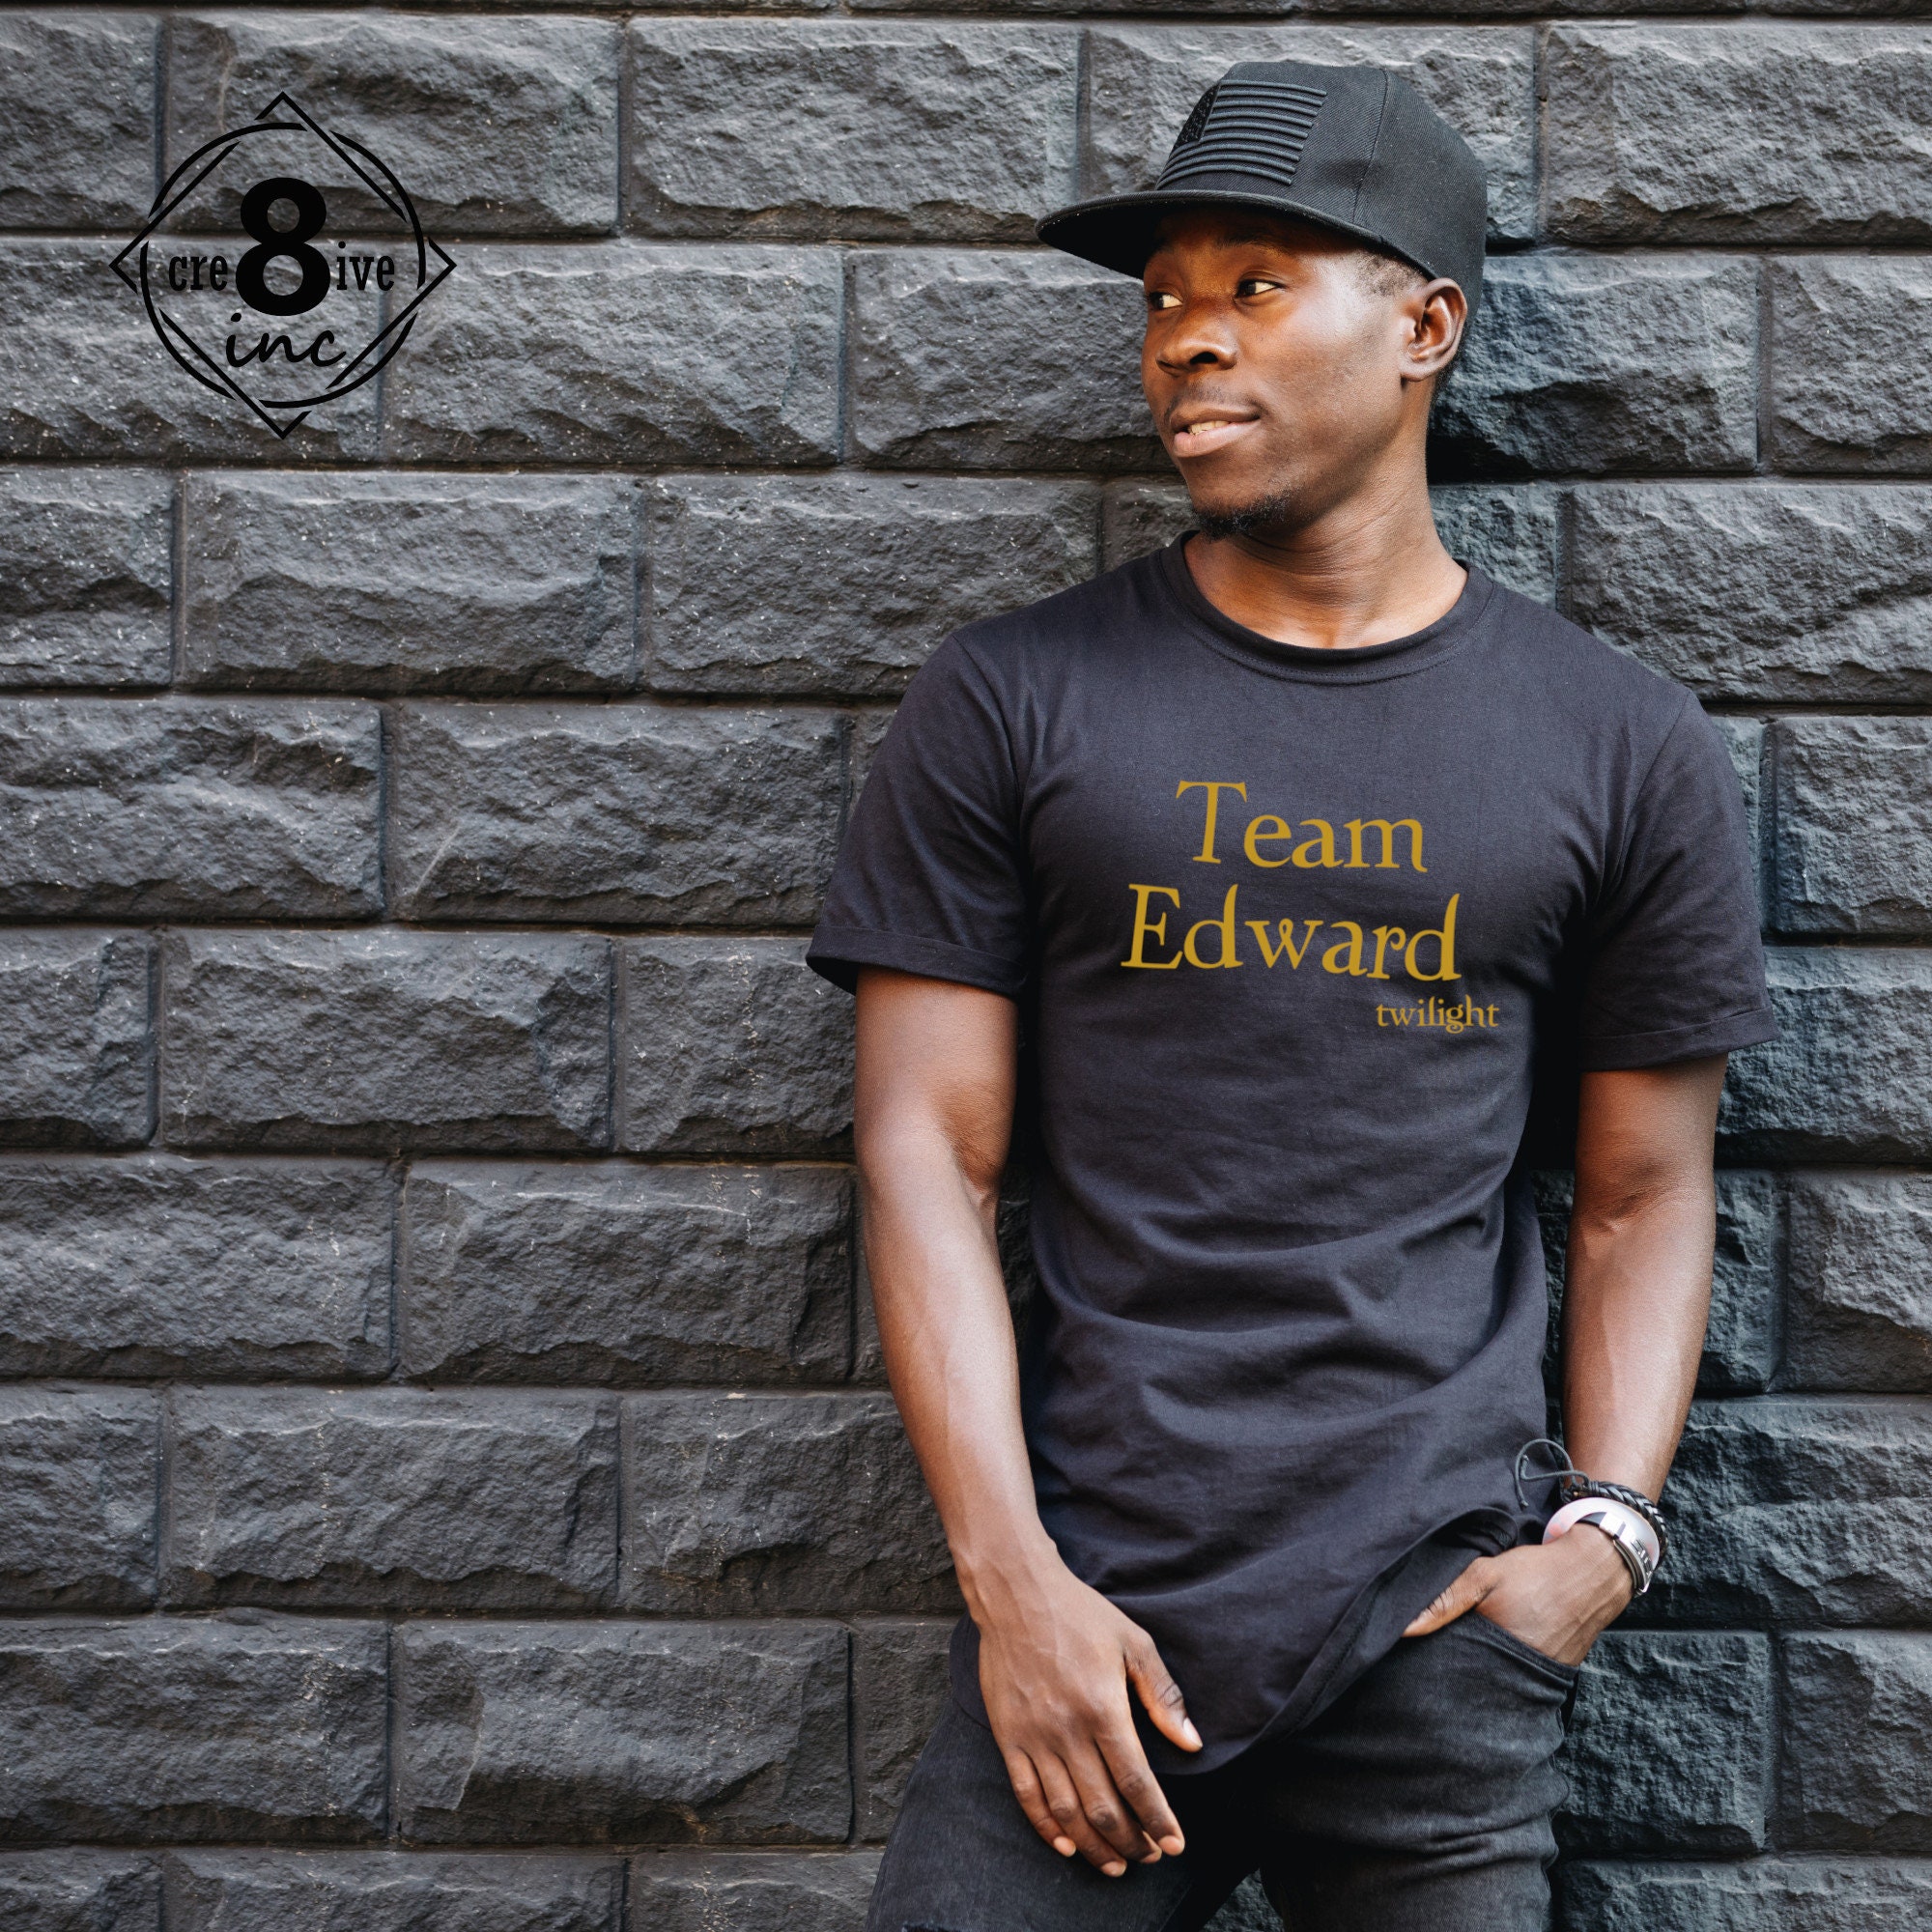 Team Edward Twilight Vampire Time of Night Black Tee Shirt With GOLD/WHITE  or NEW Silver Lettering 